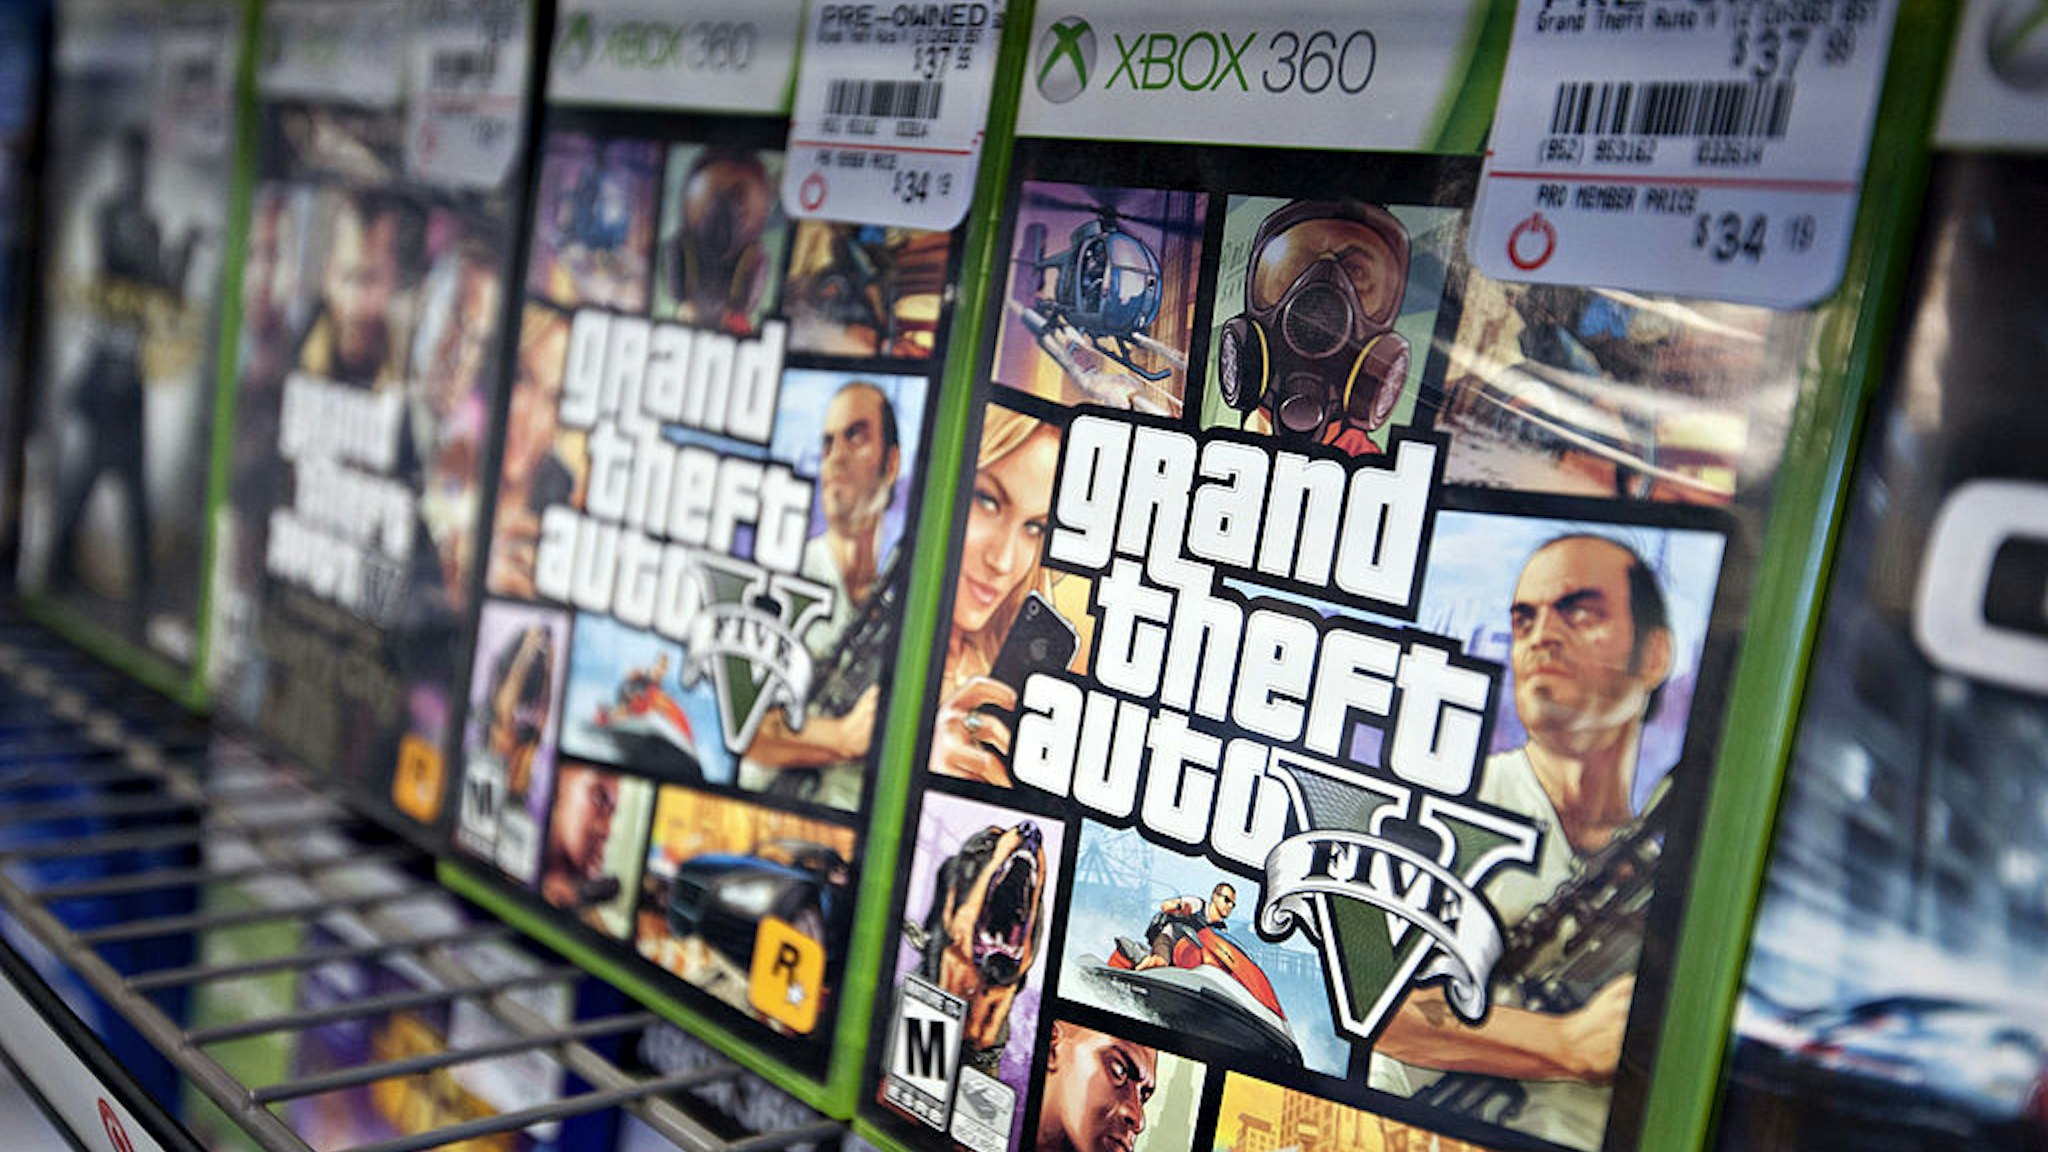 Copies of Take-Two Interactive Software Inc. "Grand Theft Auto V" for the Microsoft Corp. Xbox 360 game system sit on display for sale at a GameStop Corp. store in Peru, Illinois, U.S., on Wednesday, March 26, 2014.